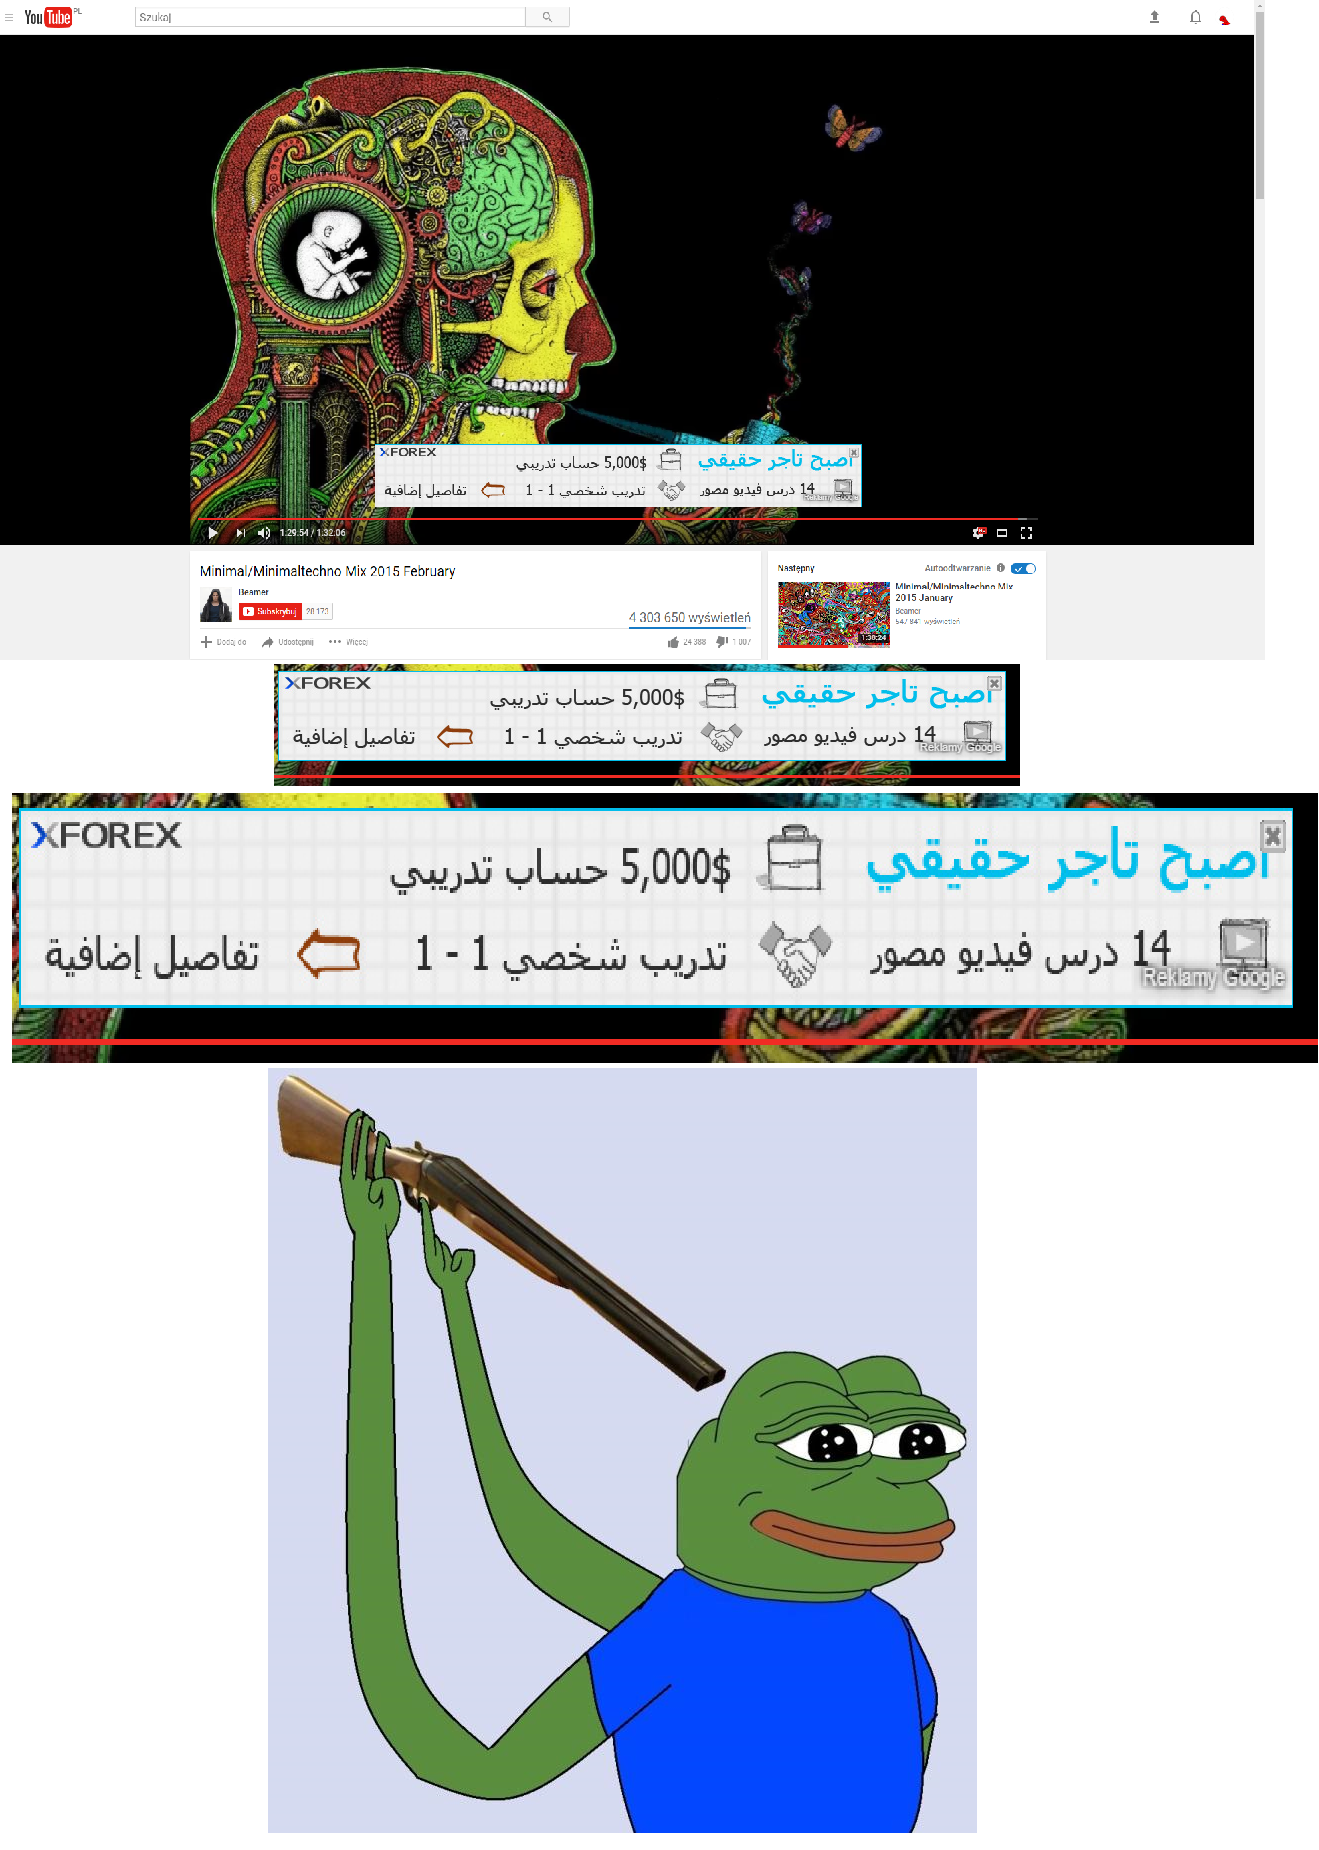 Google is absolutely Halal (mad paint skillz)